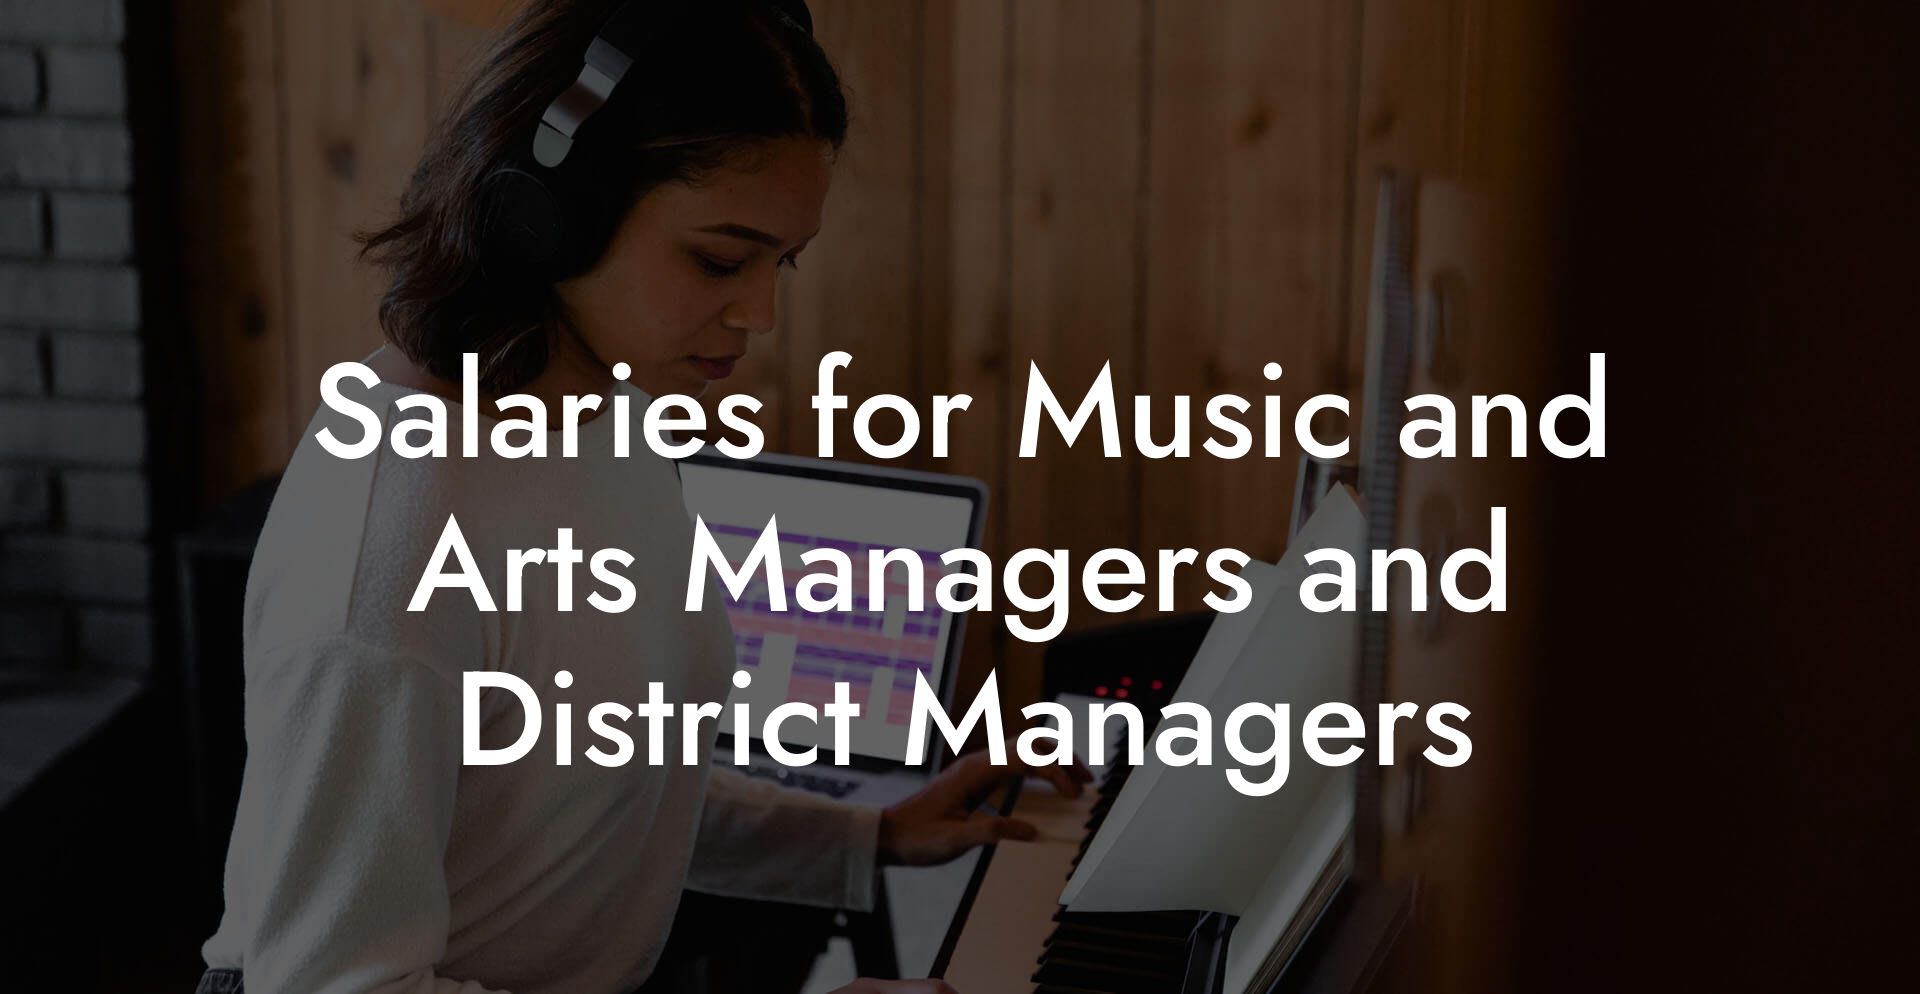 Salaries for Music and Arts Managers and District Managers